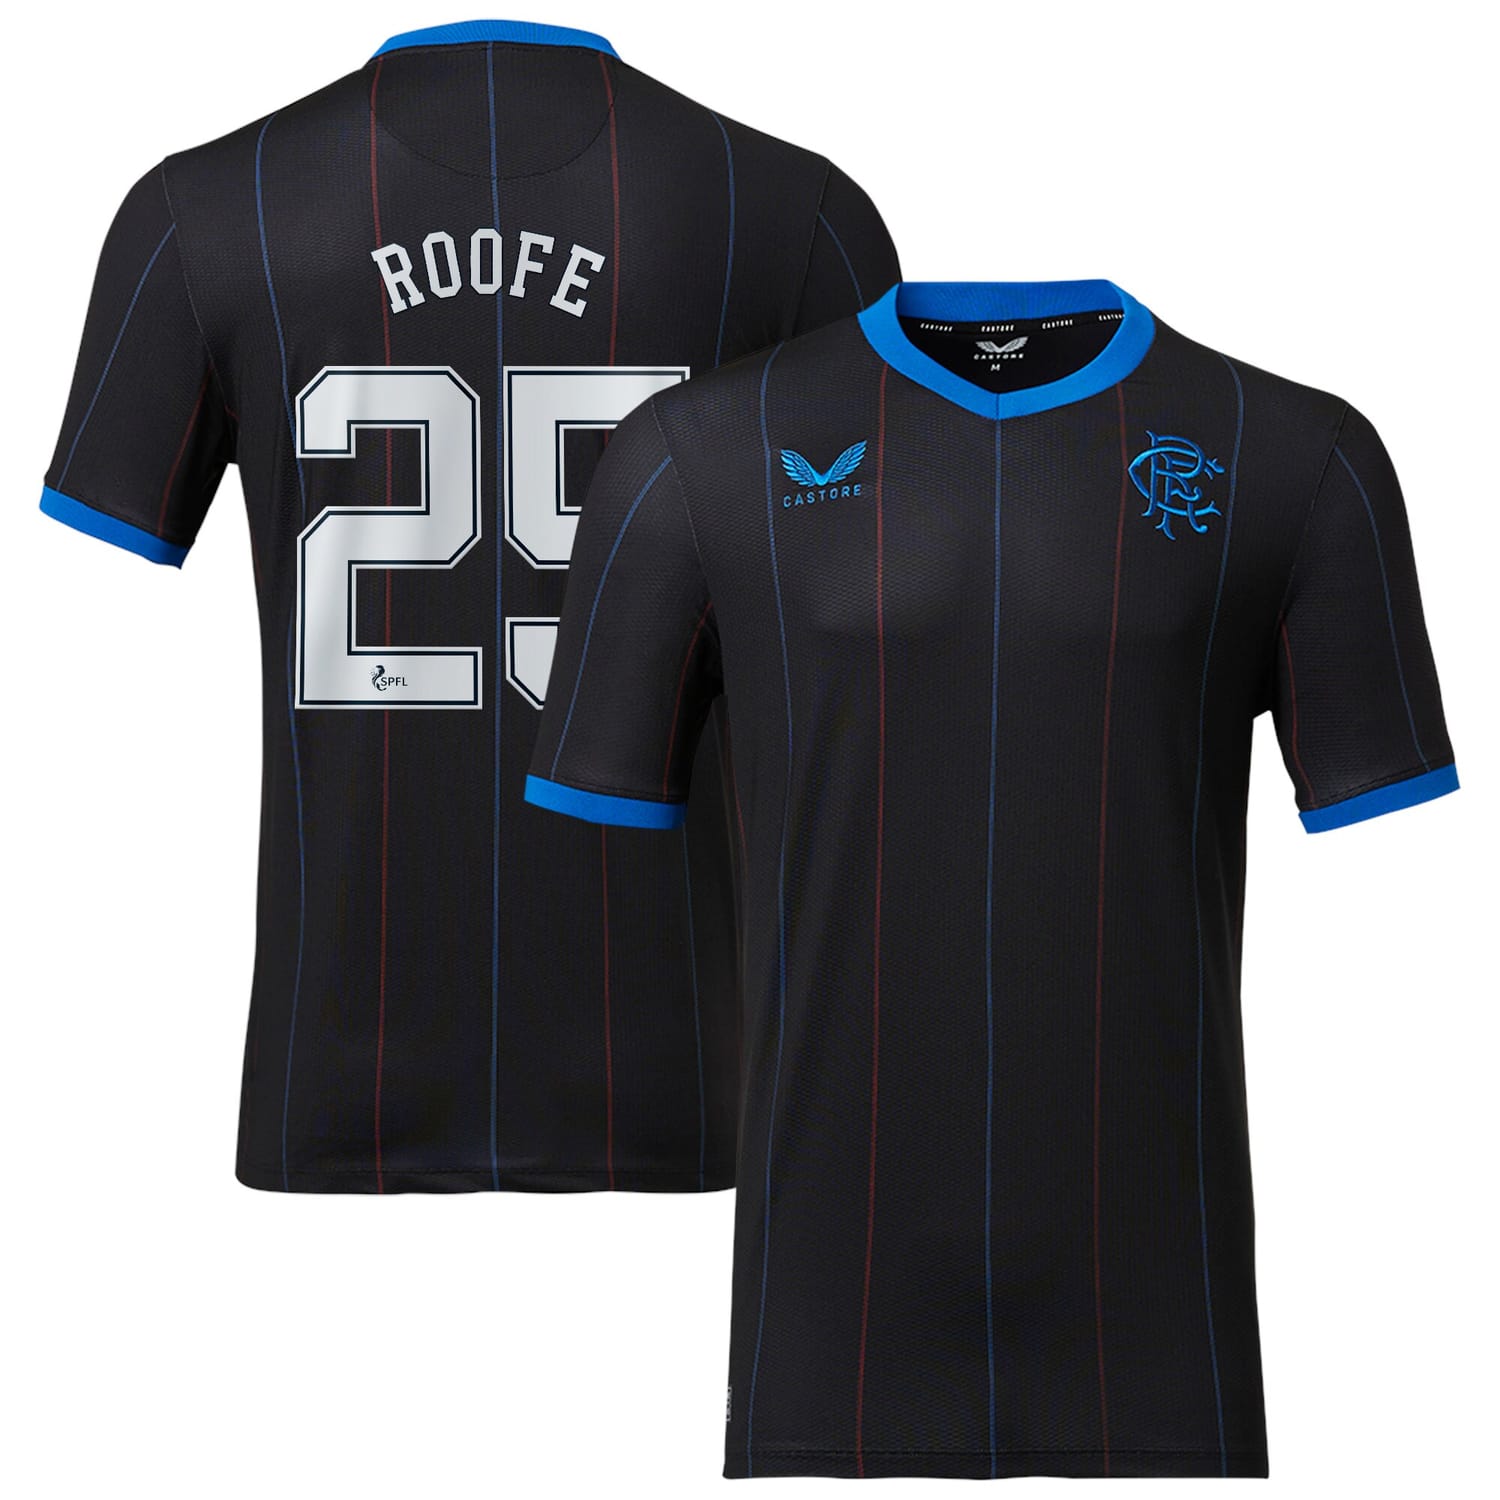 Scottish Premiership Rangers FC Fourth Pro Jersey Shirt 2022-23 player Roofe 25 printing for Men